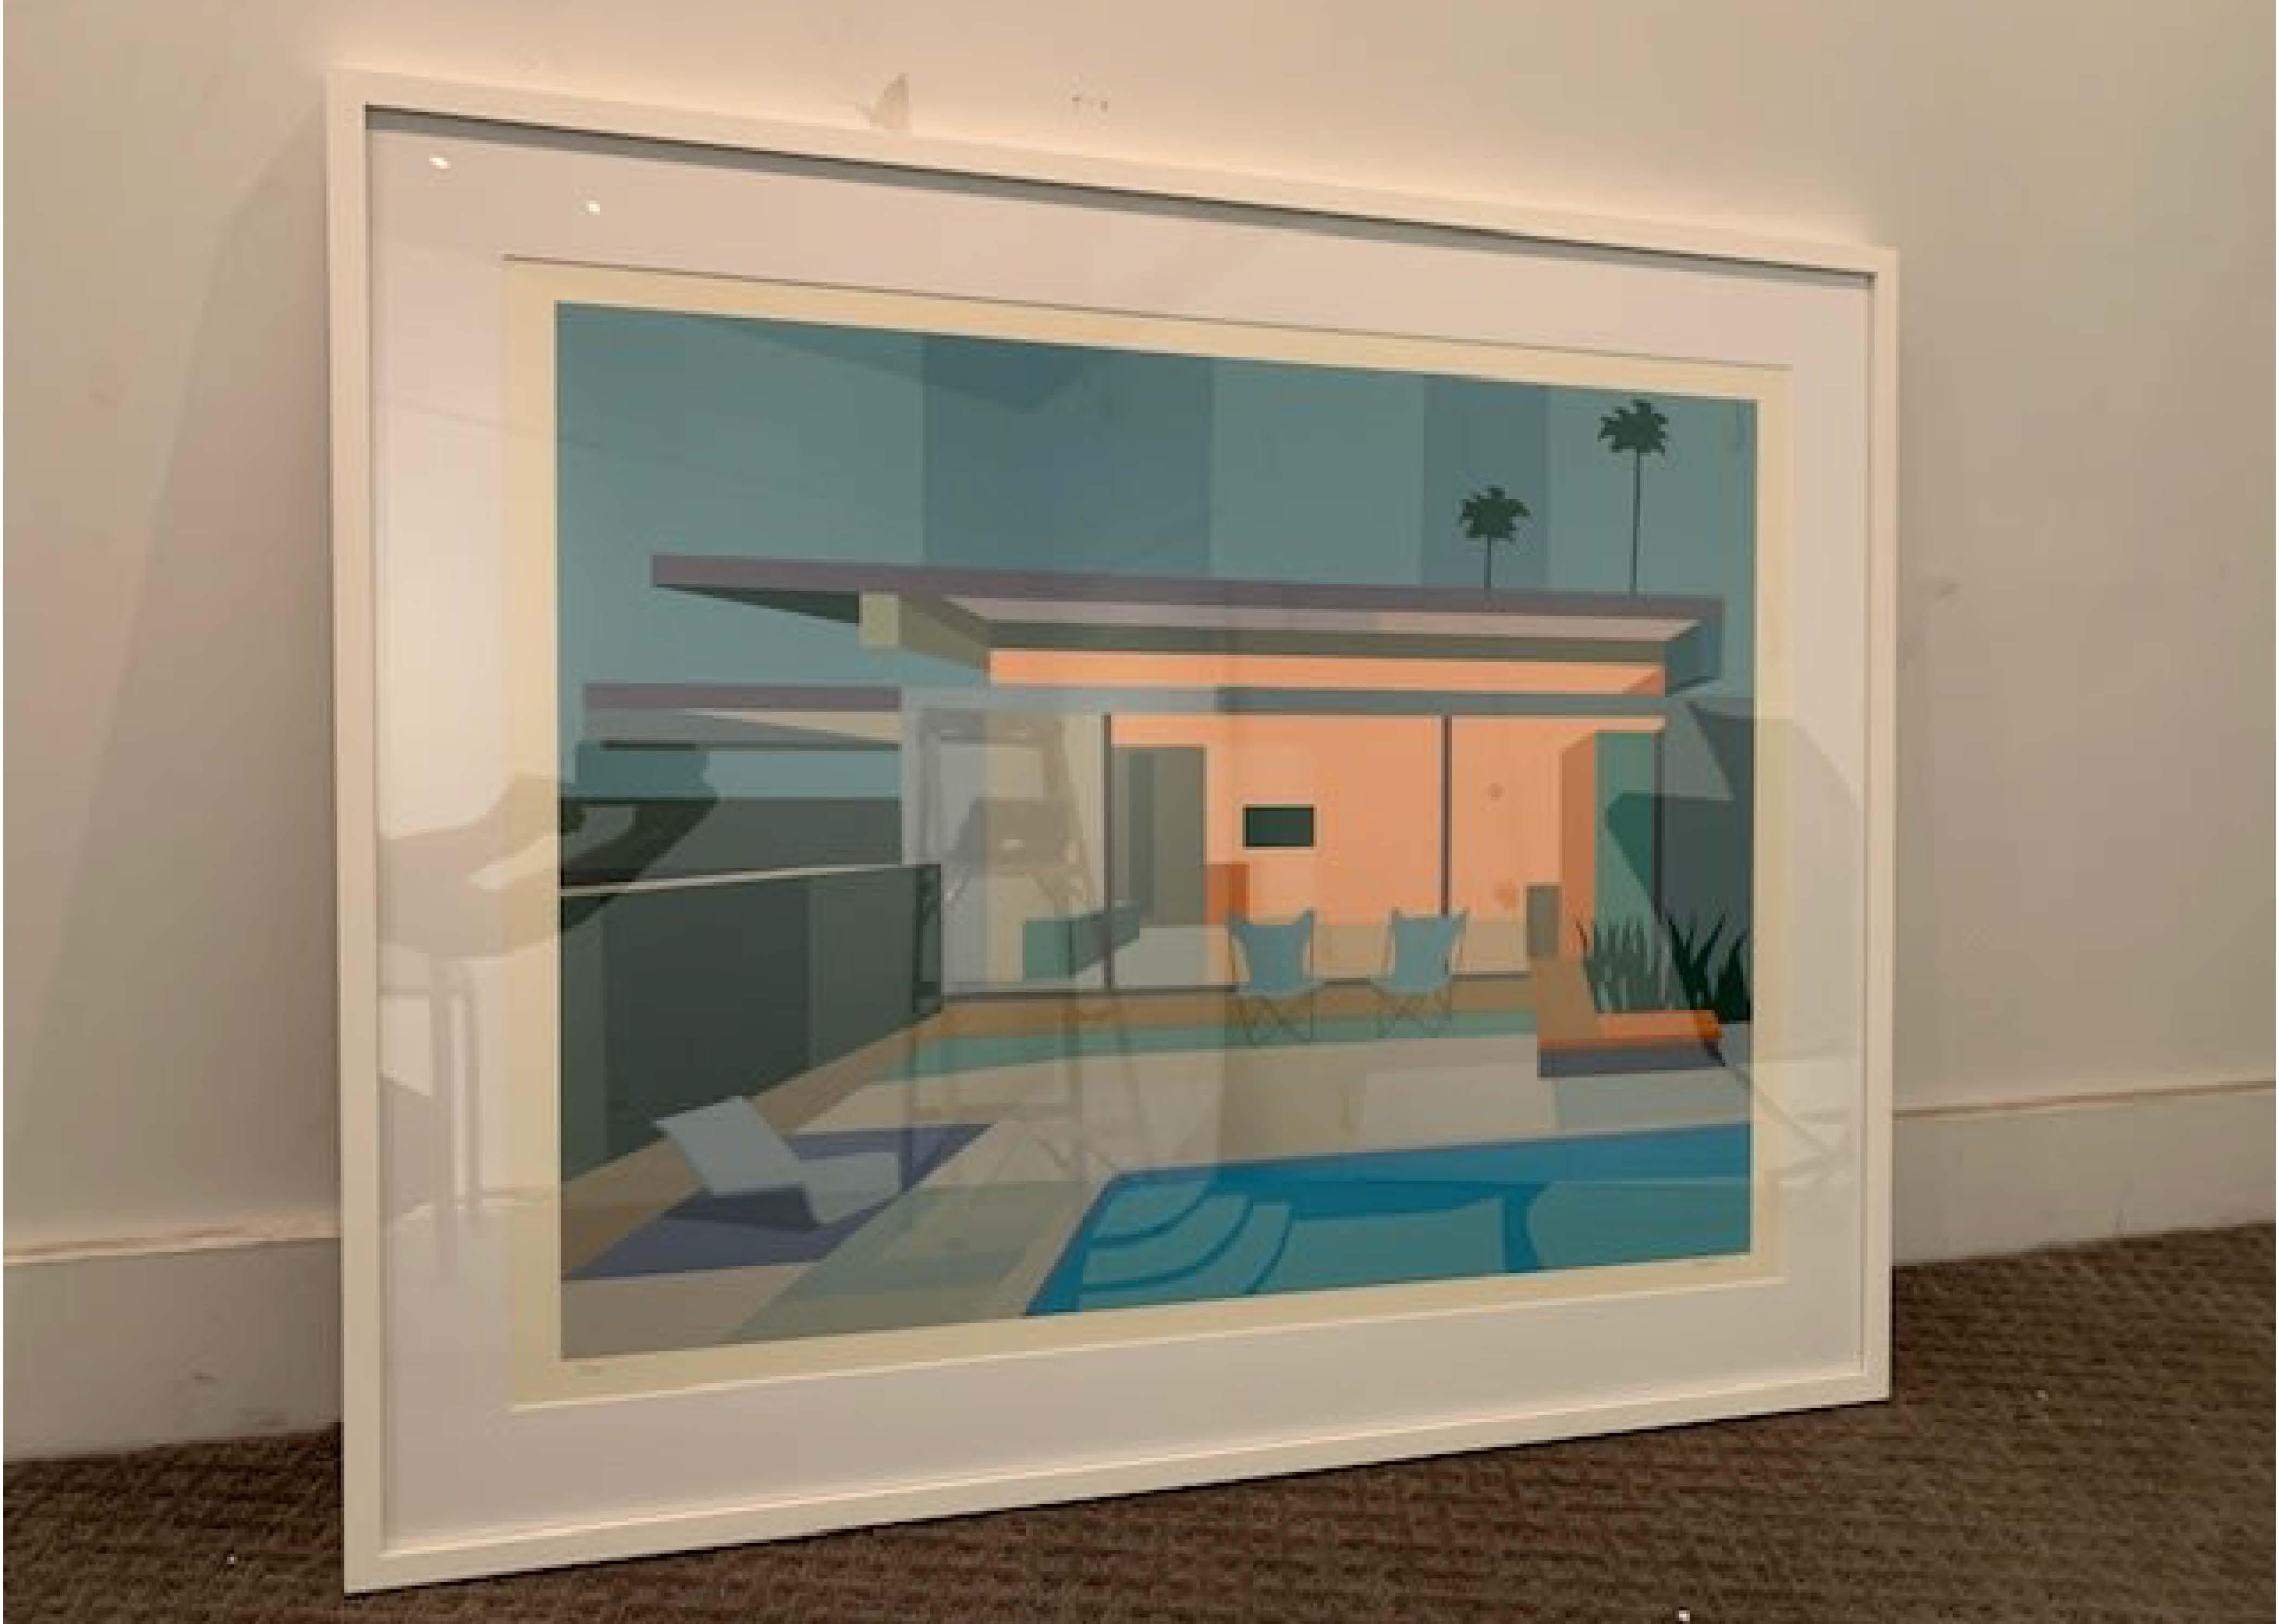 Modernist and mid-century architecture - Wexler House, Lithography - Print by Andy Burgess